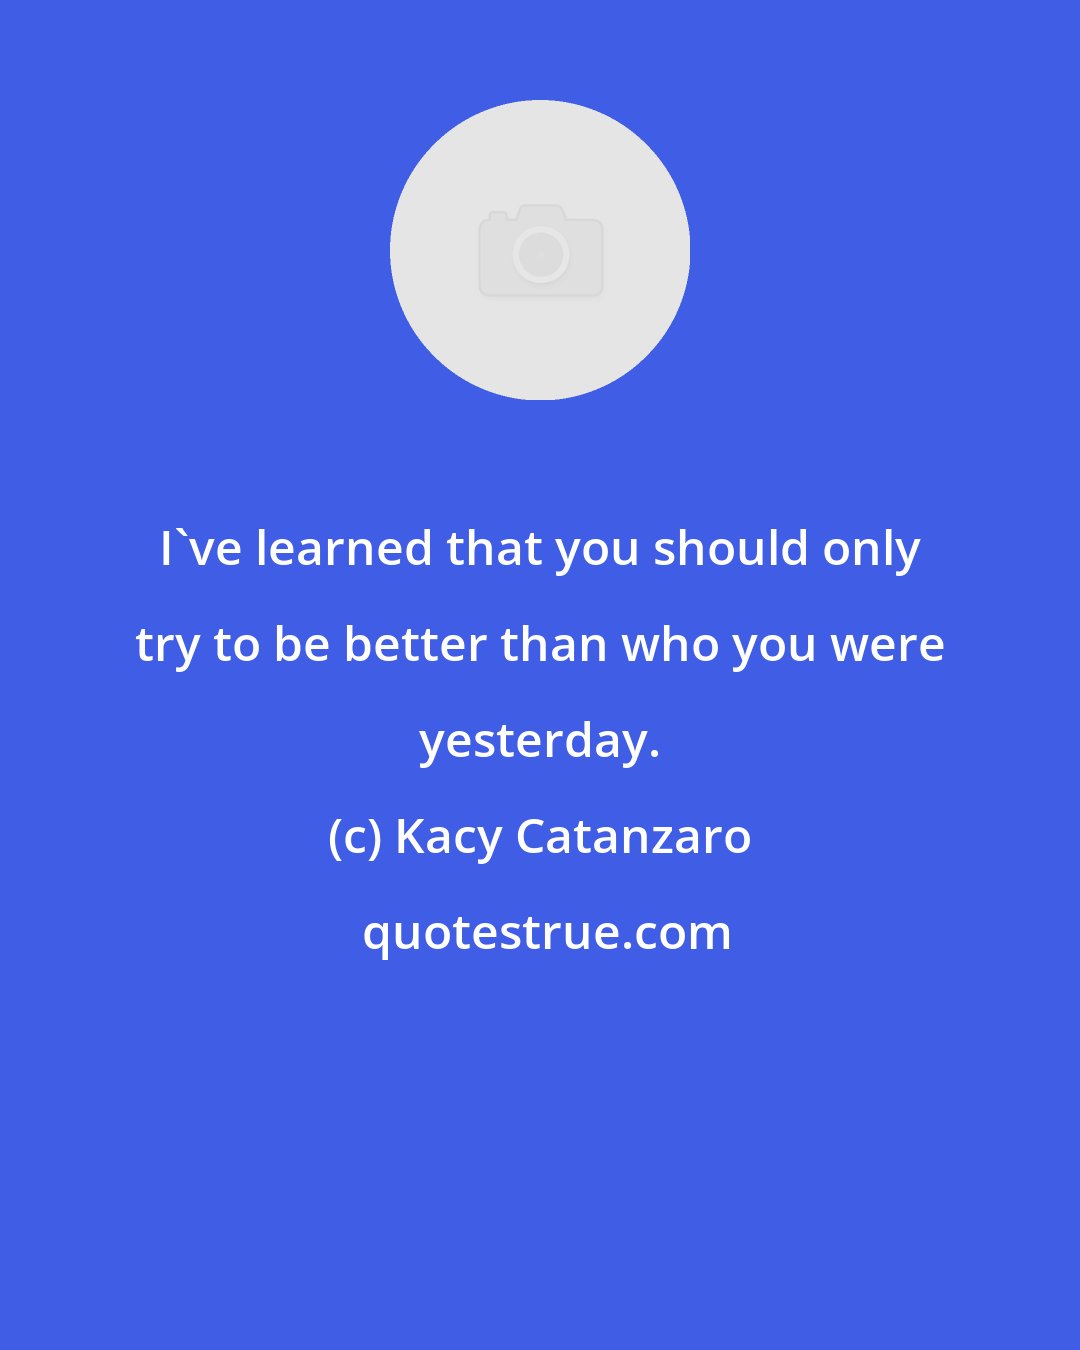 Kacy Catanzaro: I've learned that you should only try to be better than who you were yesterday.